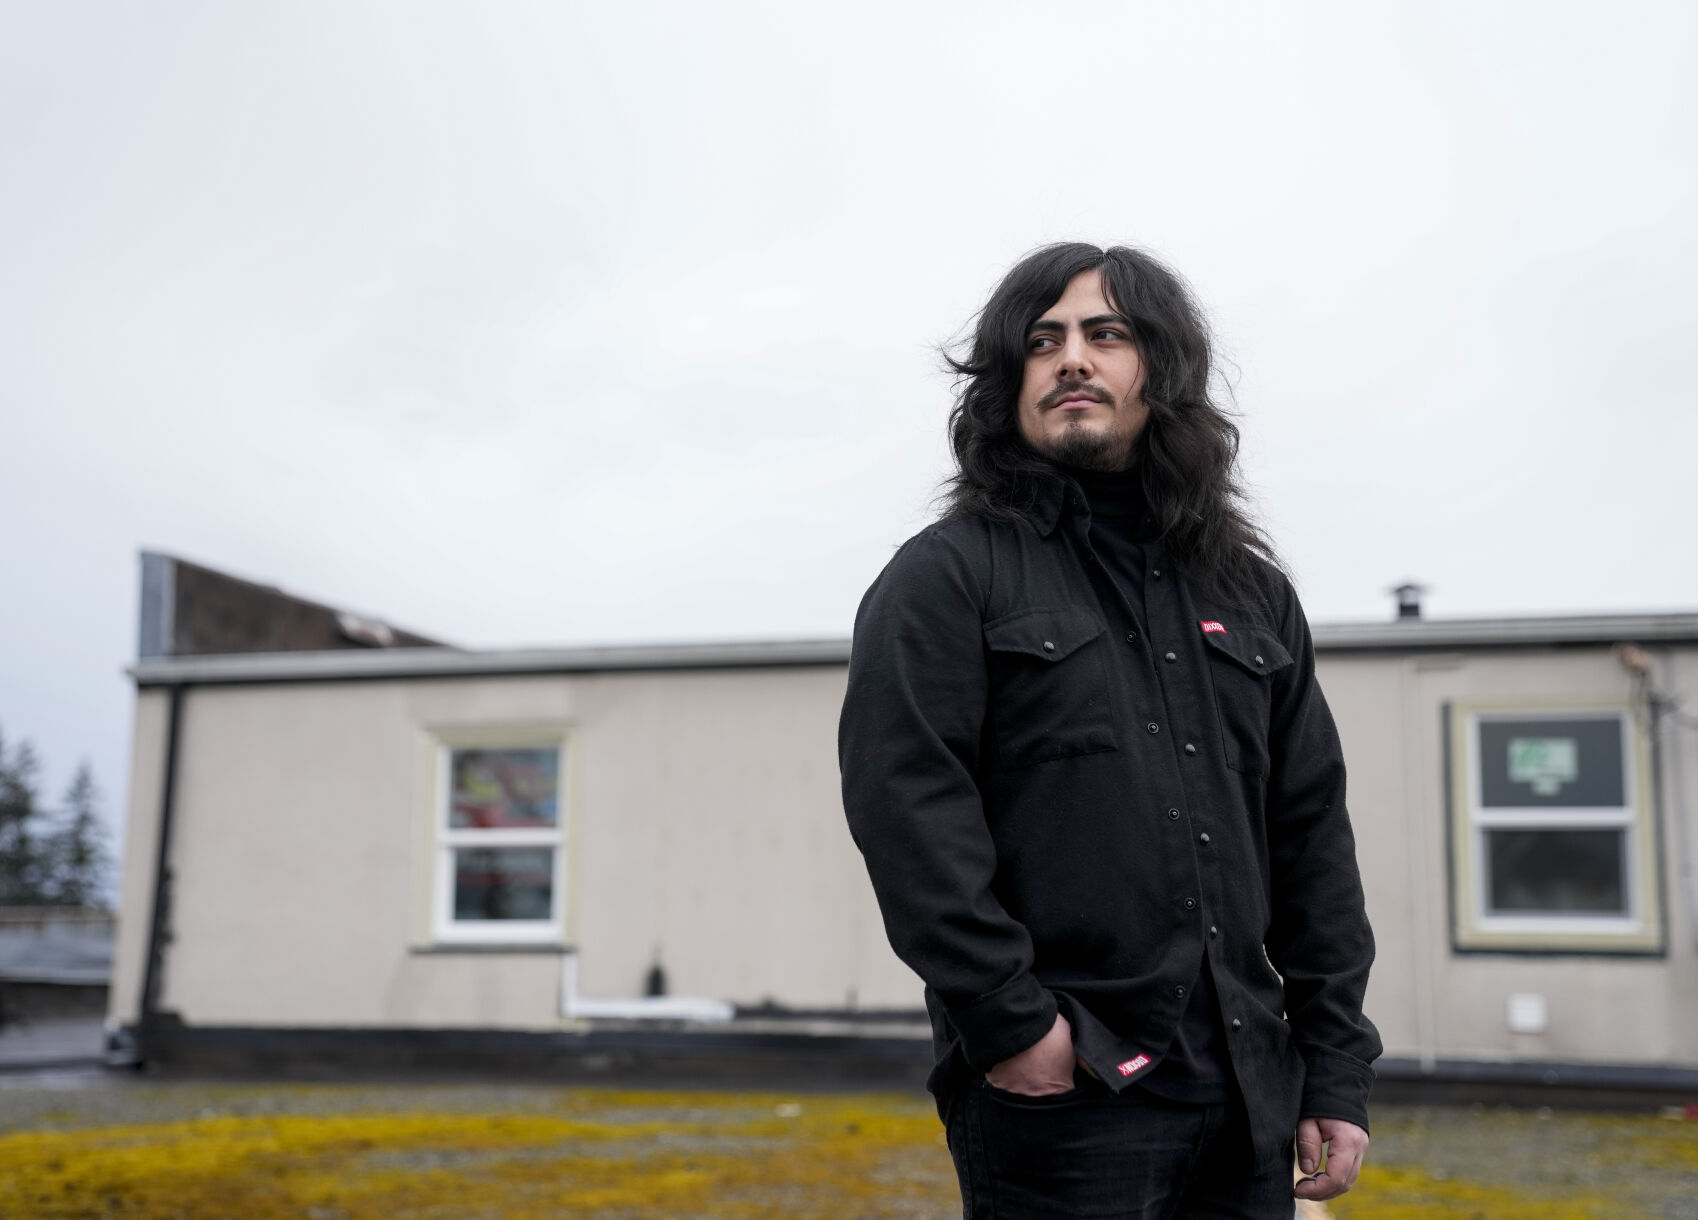 <p>Santos Enrique Camara, who dropped out of Shoreline Community College at age 19 in 2015 after completing one semester studying audio engineering, poses for a portrait outside his home Friday, March 24, 2023, in Marysville, Wash. Camara, now 27, had difficulty paying tuition and finding time to do schoolwork while caring for his younger sister. "I seriously tried," he said. "I gave it my all." For now, Camara is happy working as a sous-chef and cook at a local restaurant while planning a tour with one of his two bands. (AP Photo/Lindsey Wasson)</p>   PHOTO CREDIT: Lindsey Wasson